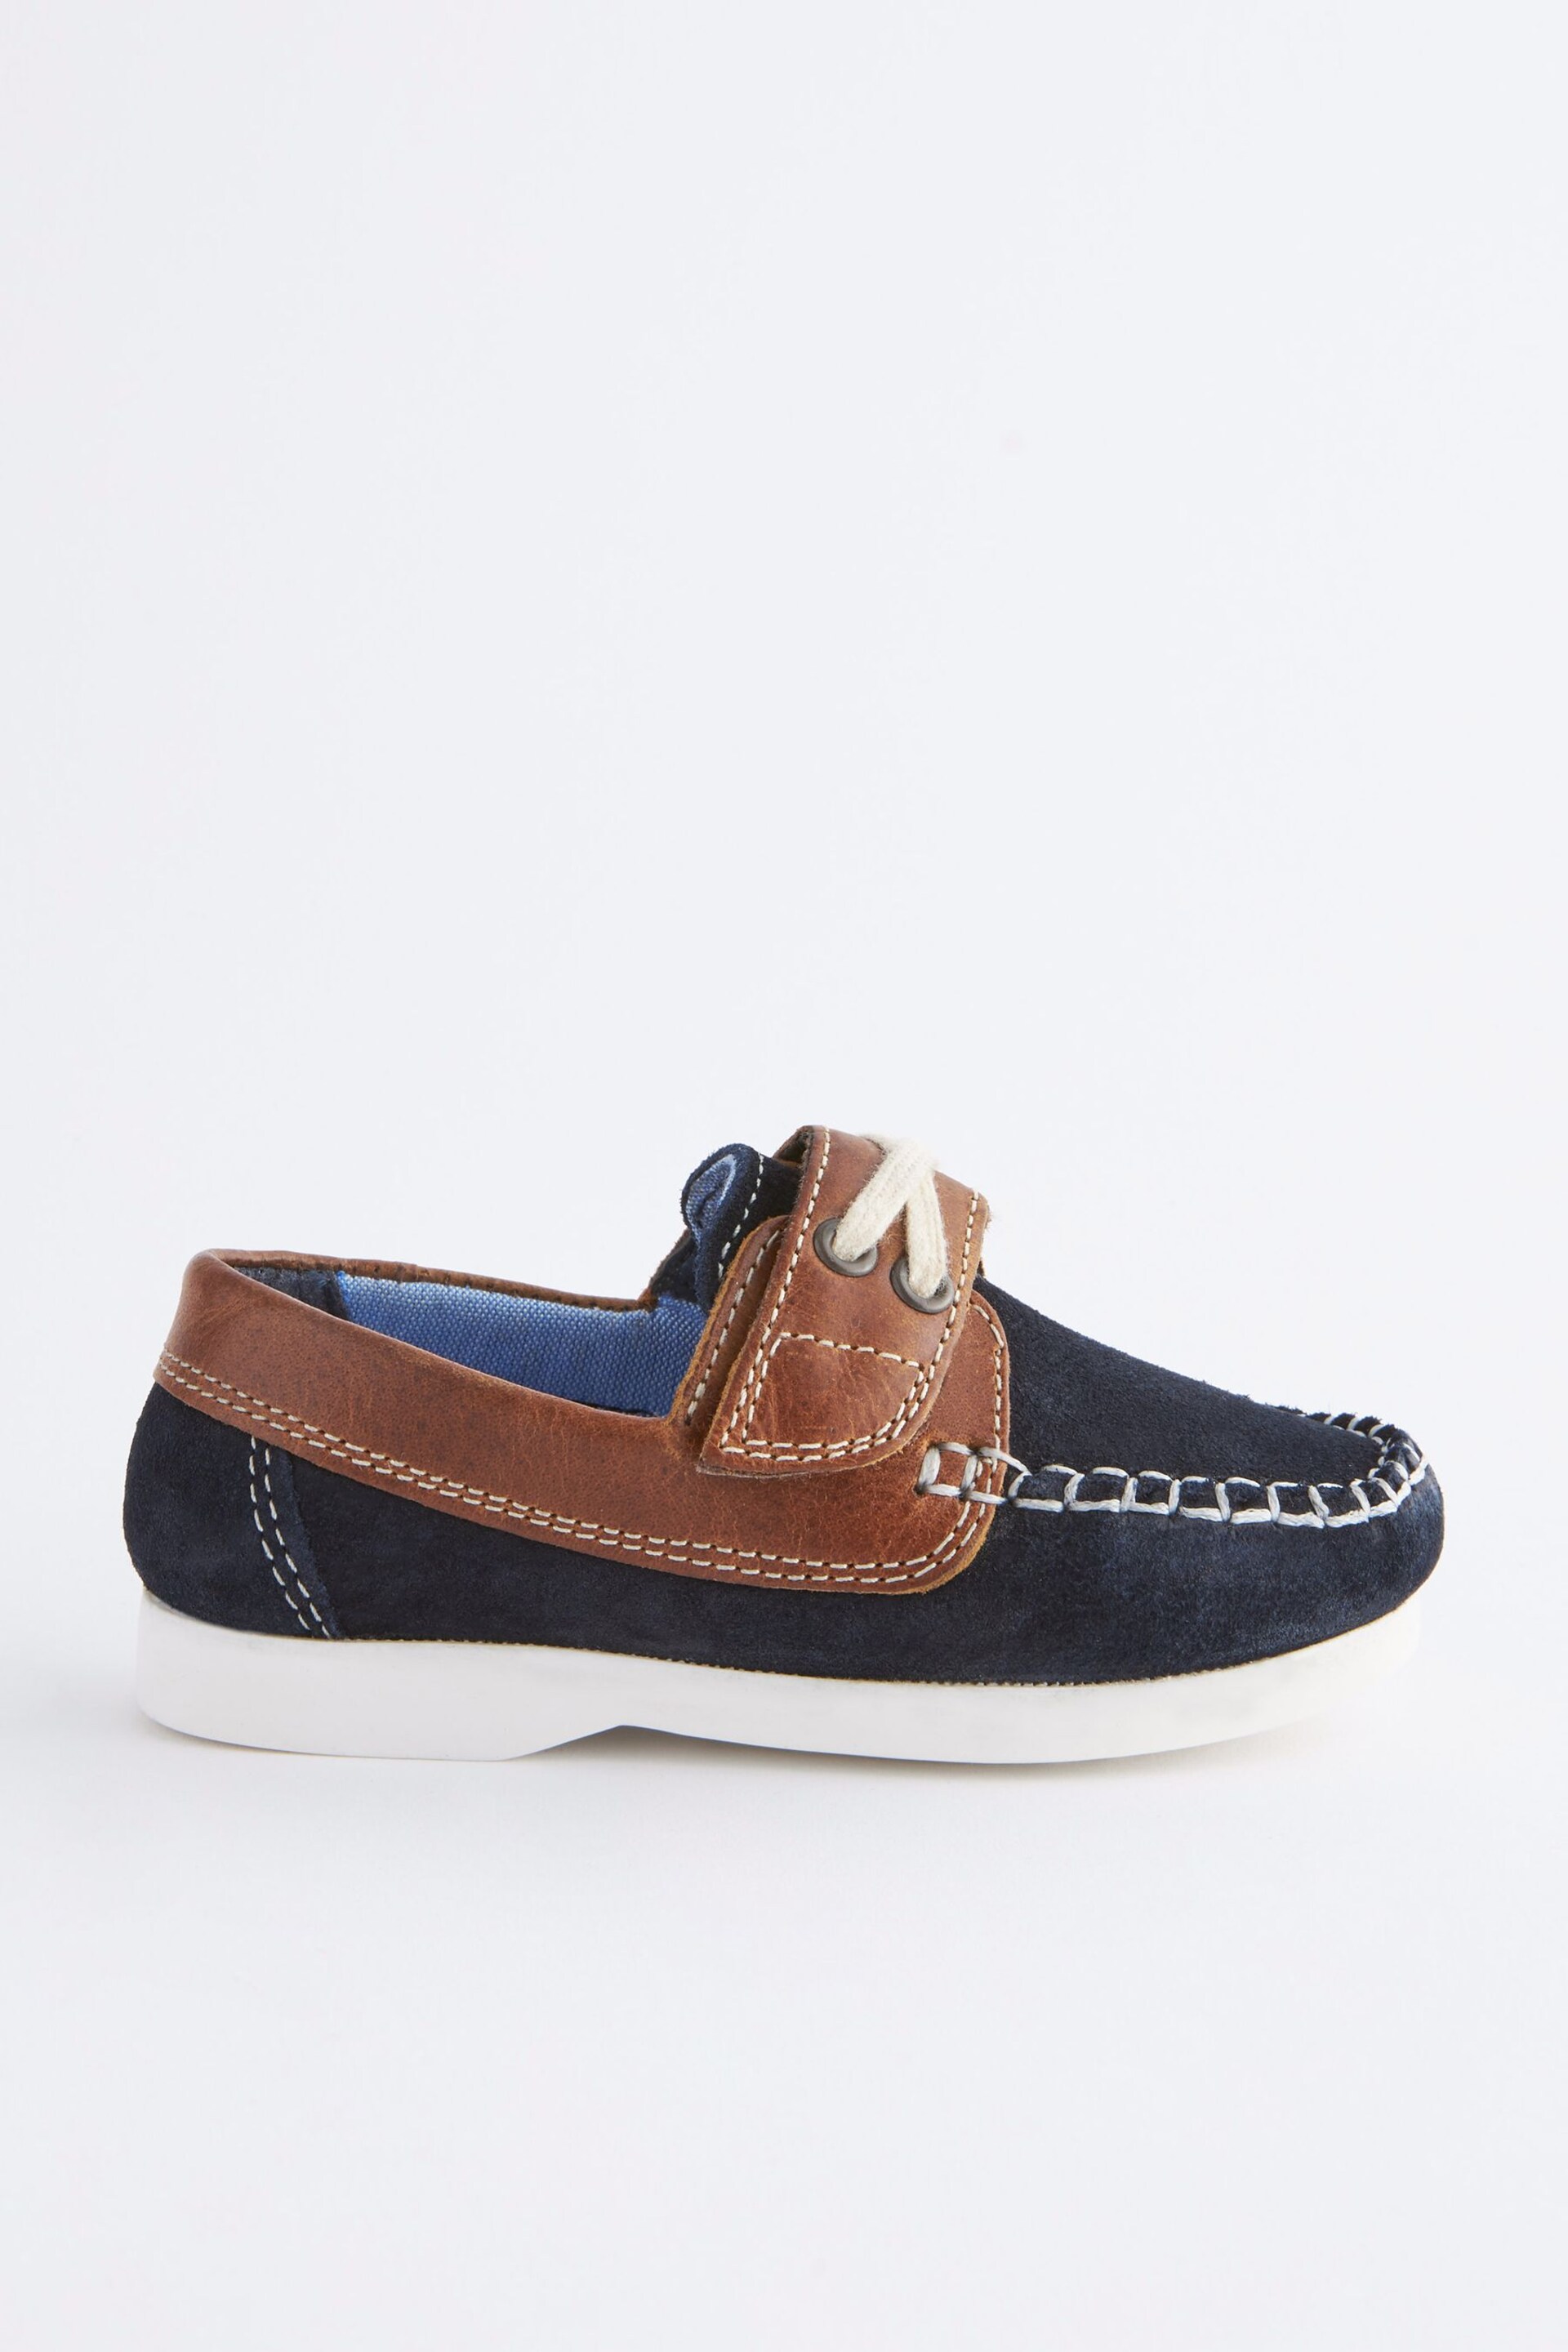 Tan/Navy Leather Boat Shoes - Image 2 of 6